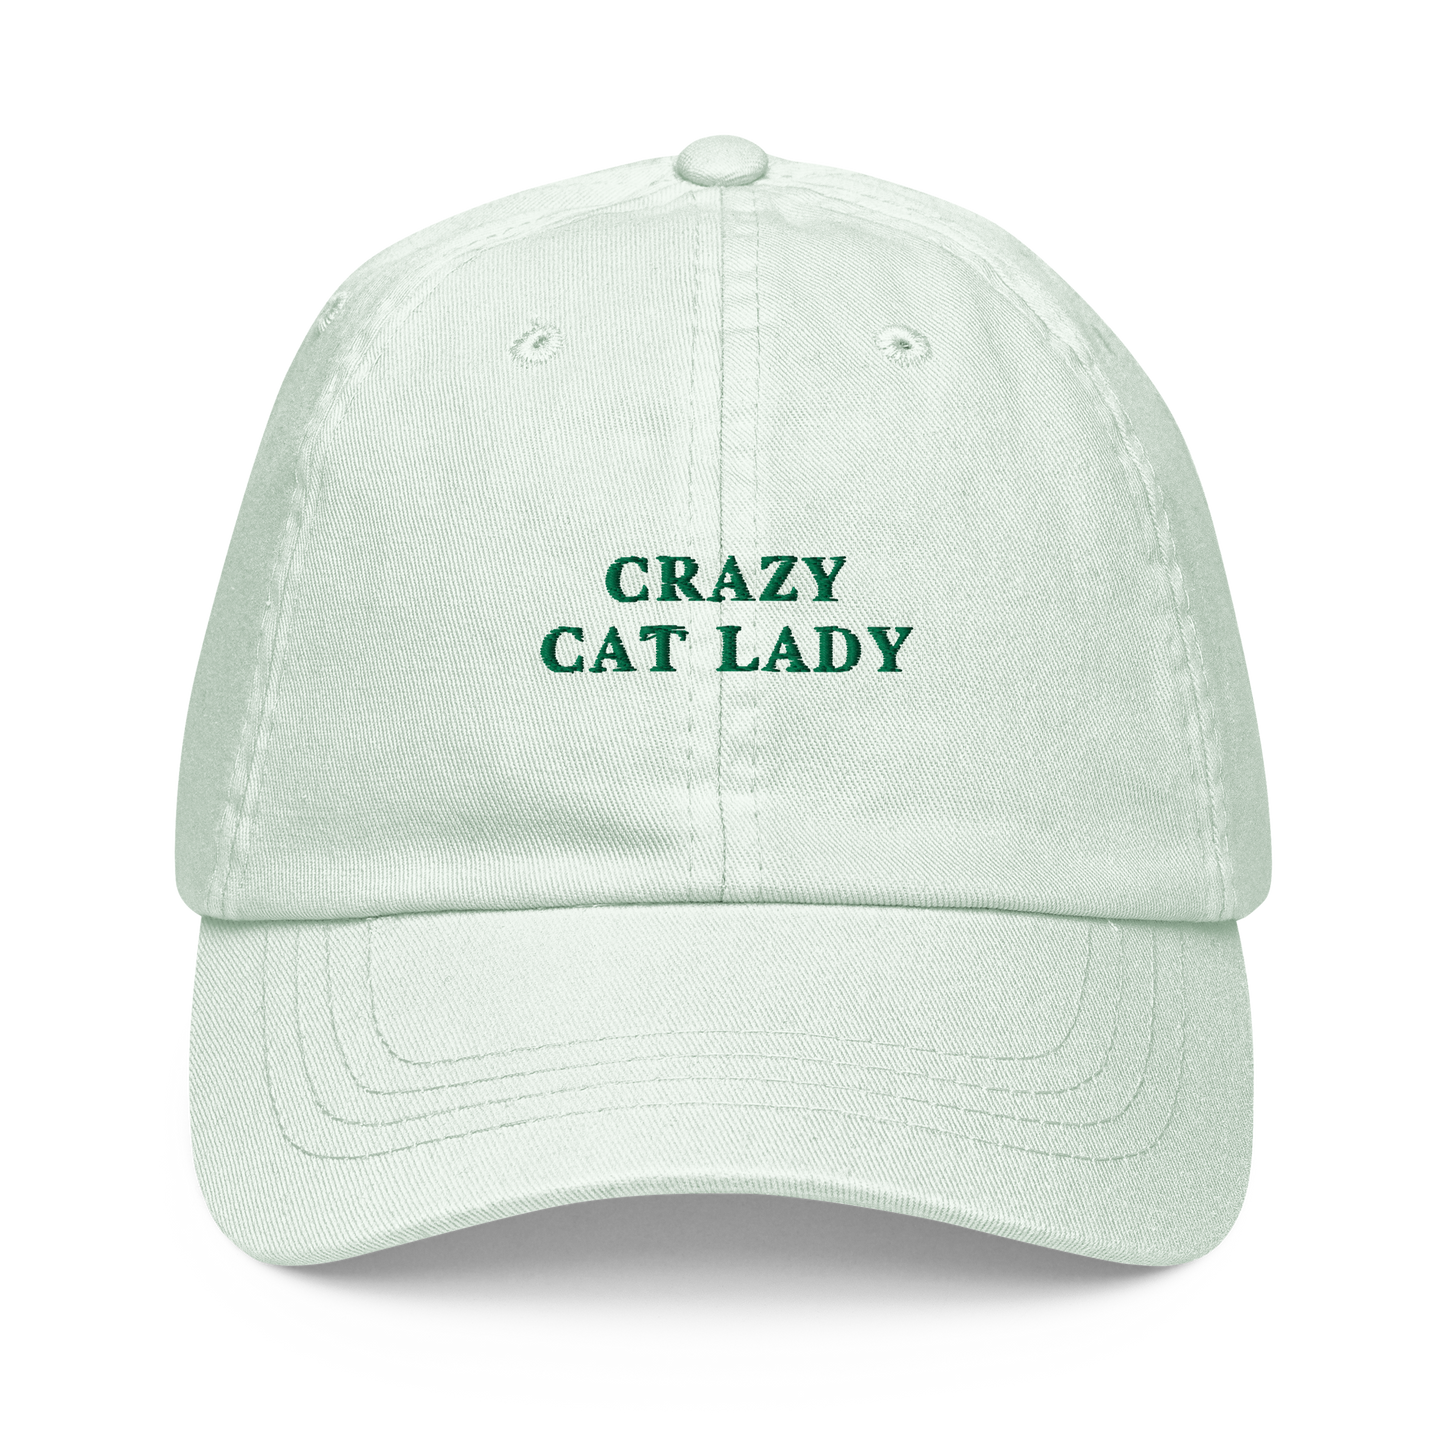 Crazy Cat Lady Embroidered Pastel Baseball Cap